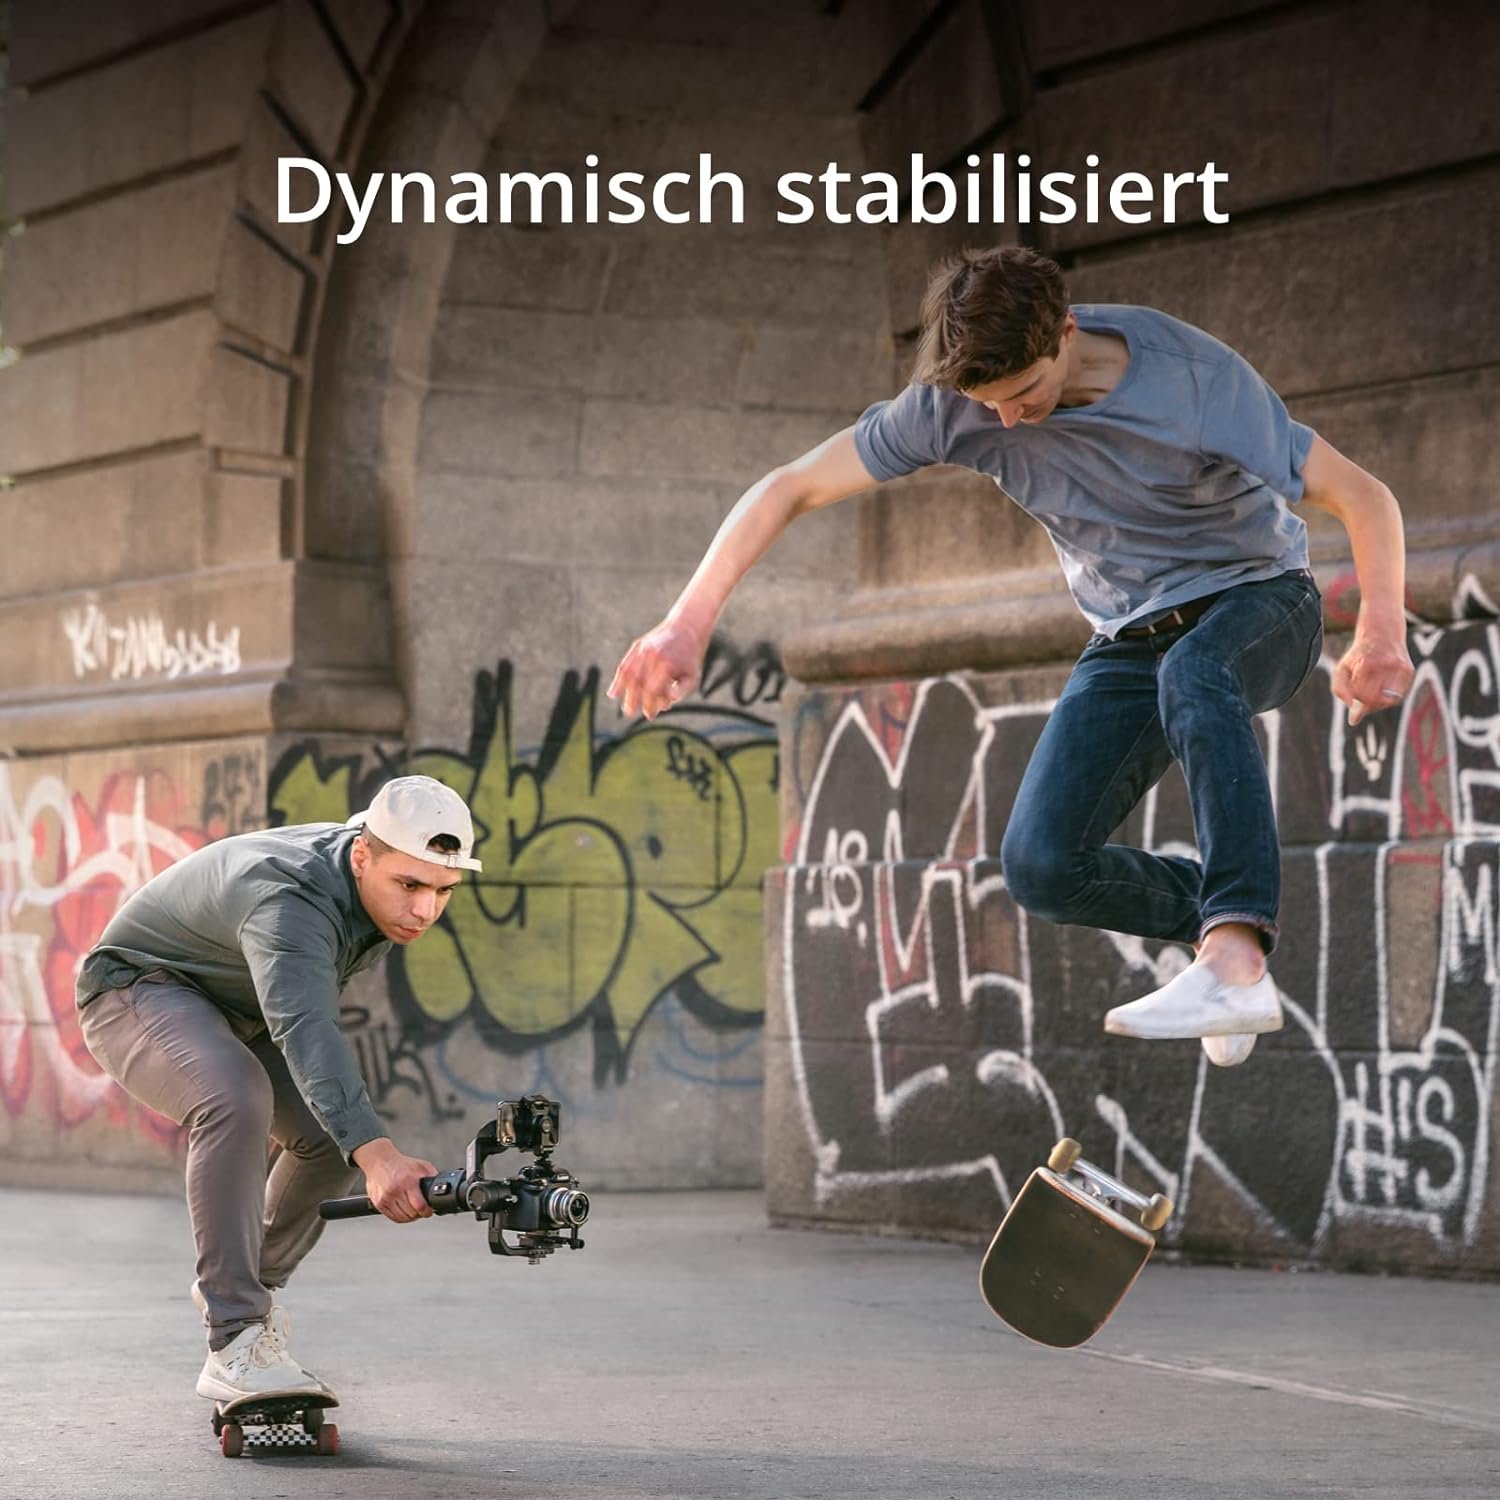 DJI RSC €“ Lightweight and Compact, Superior Stabilization, 3-Axis Gimbal  Stabilizer for Mirrorless Cameras, Nikon, Sony, Panasonic, Canon, 360  Degree